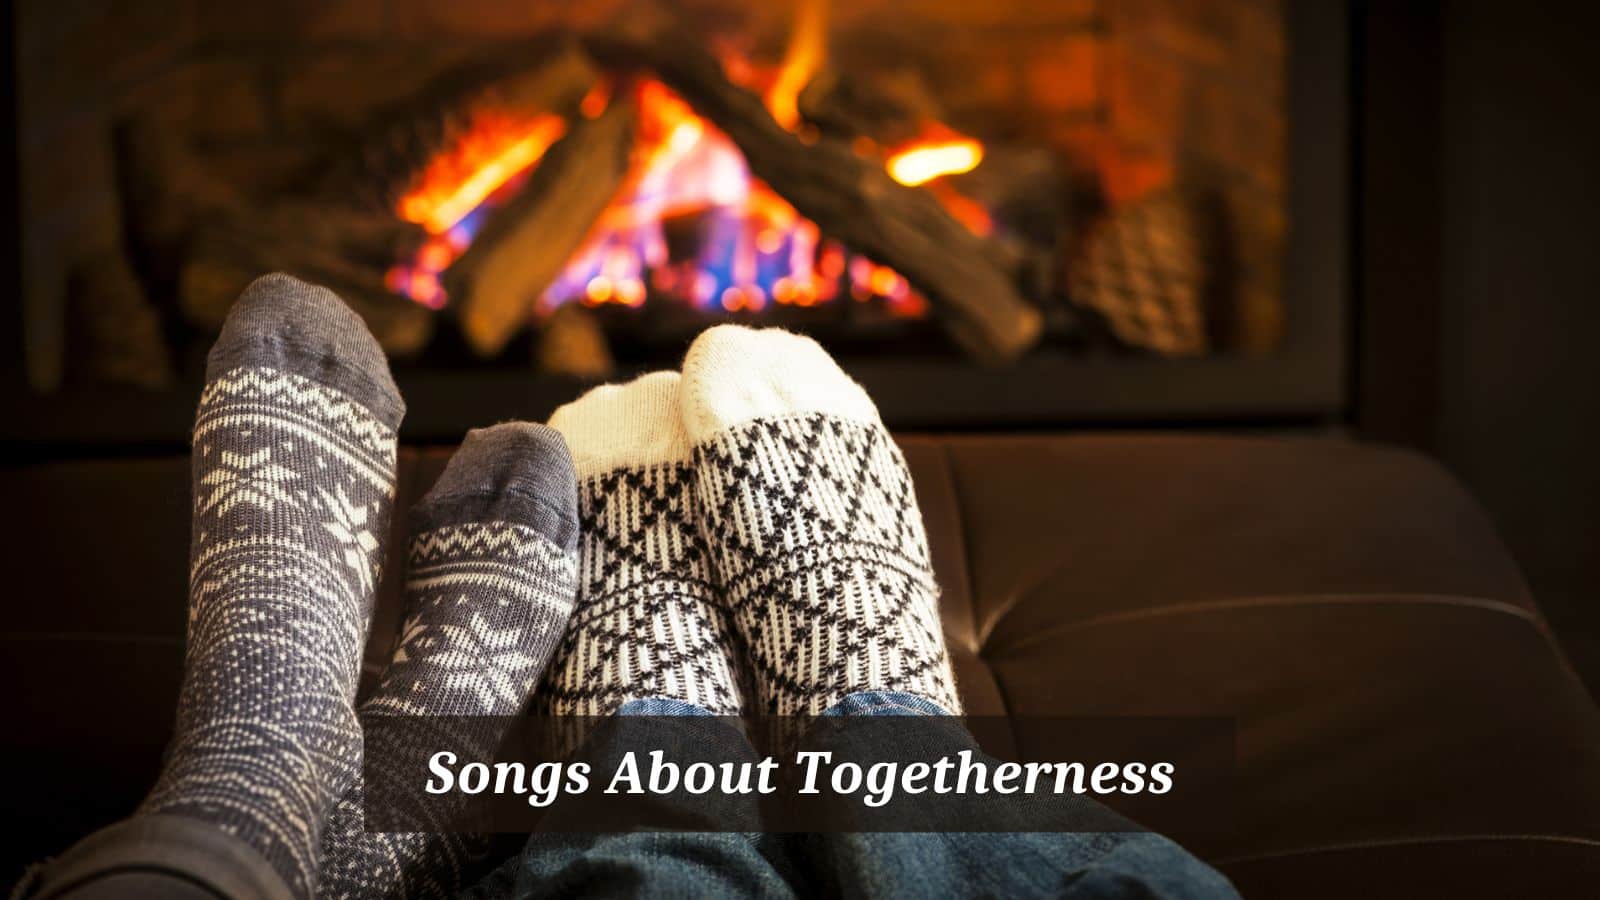 Songs About Togetherness